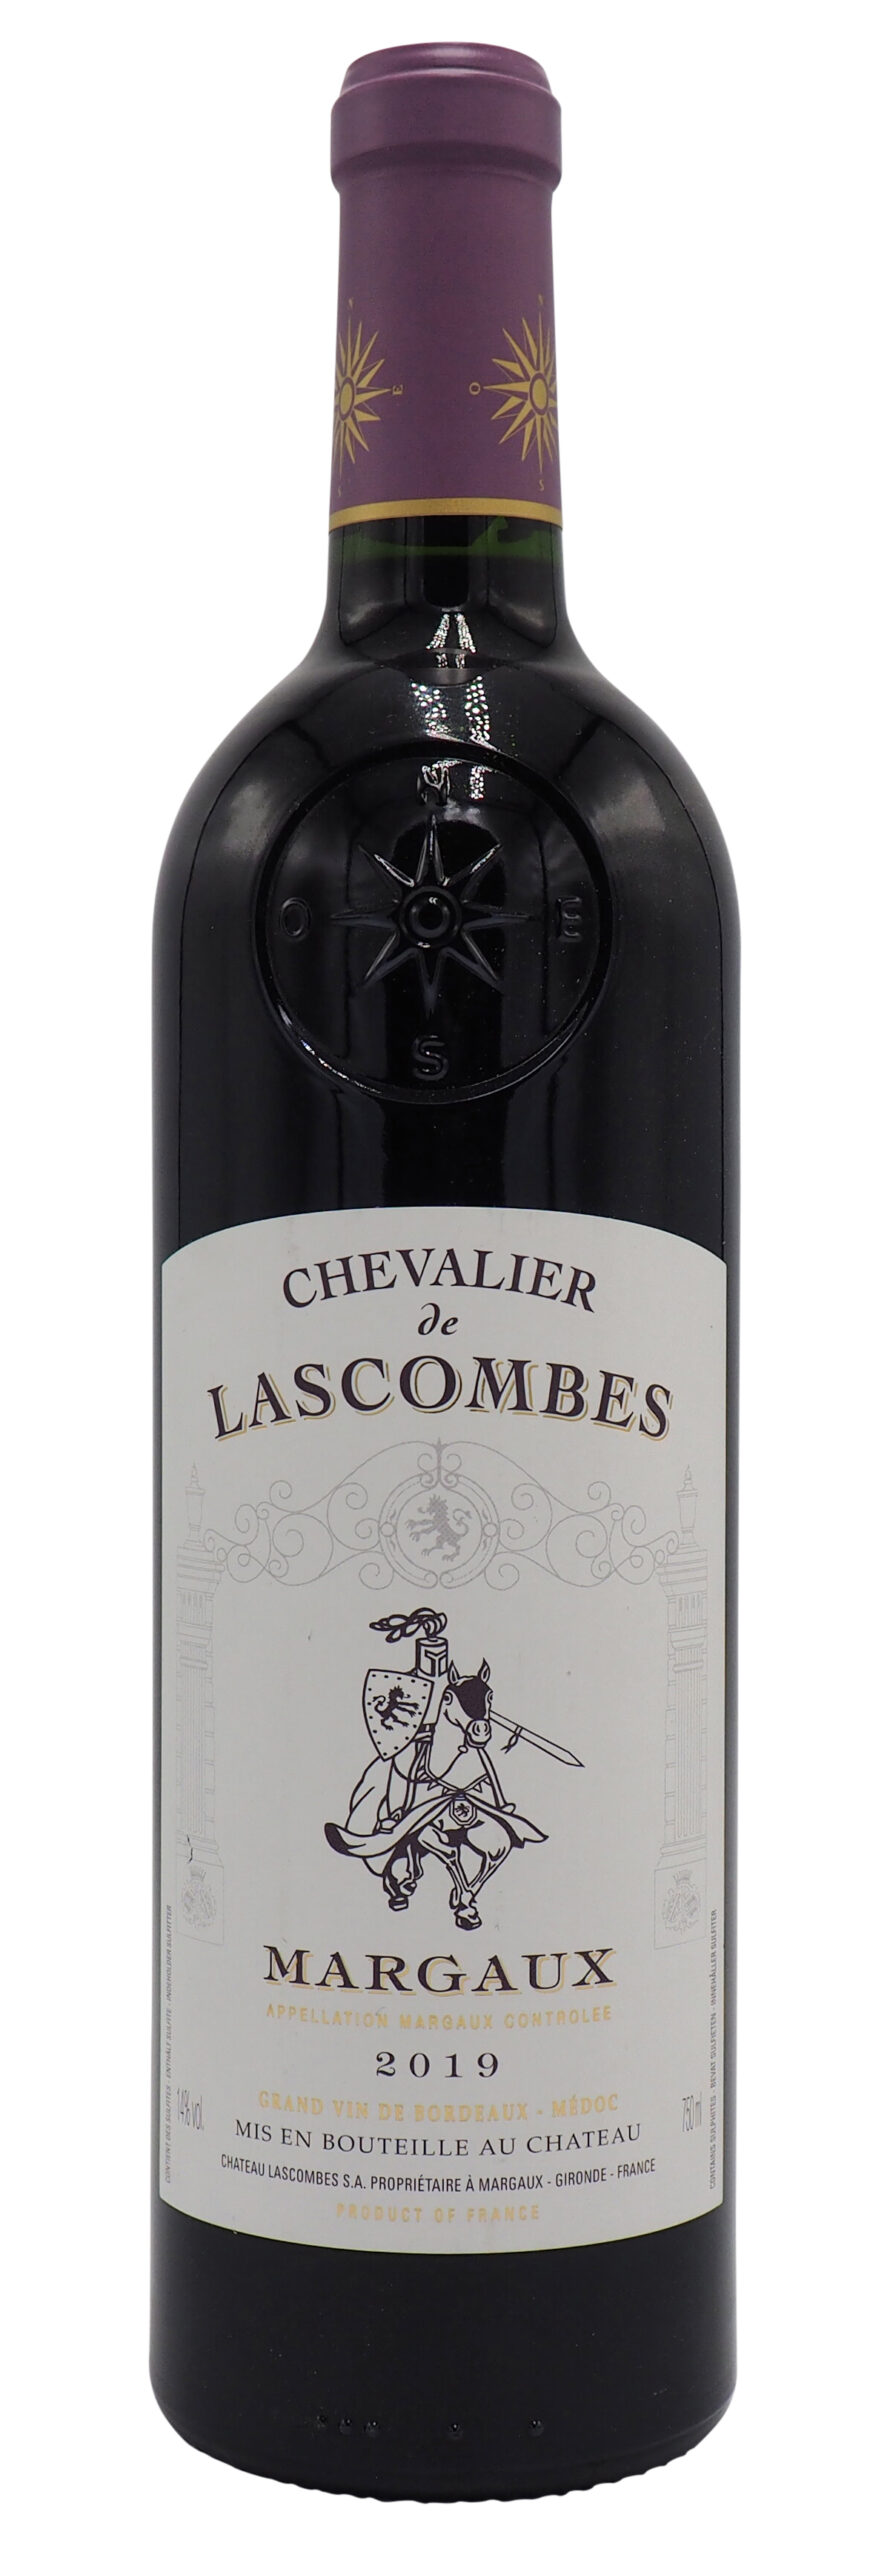 Lascombes Margaux 2019 Chevalier